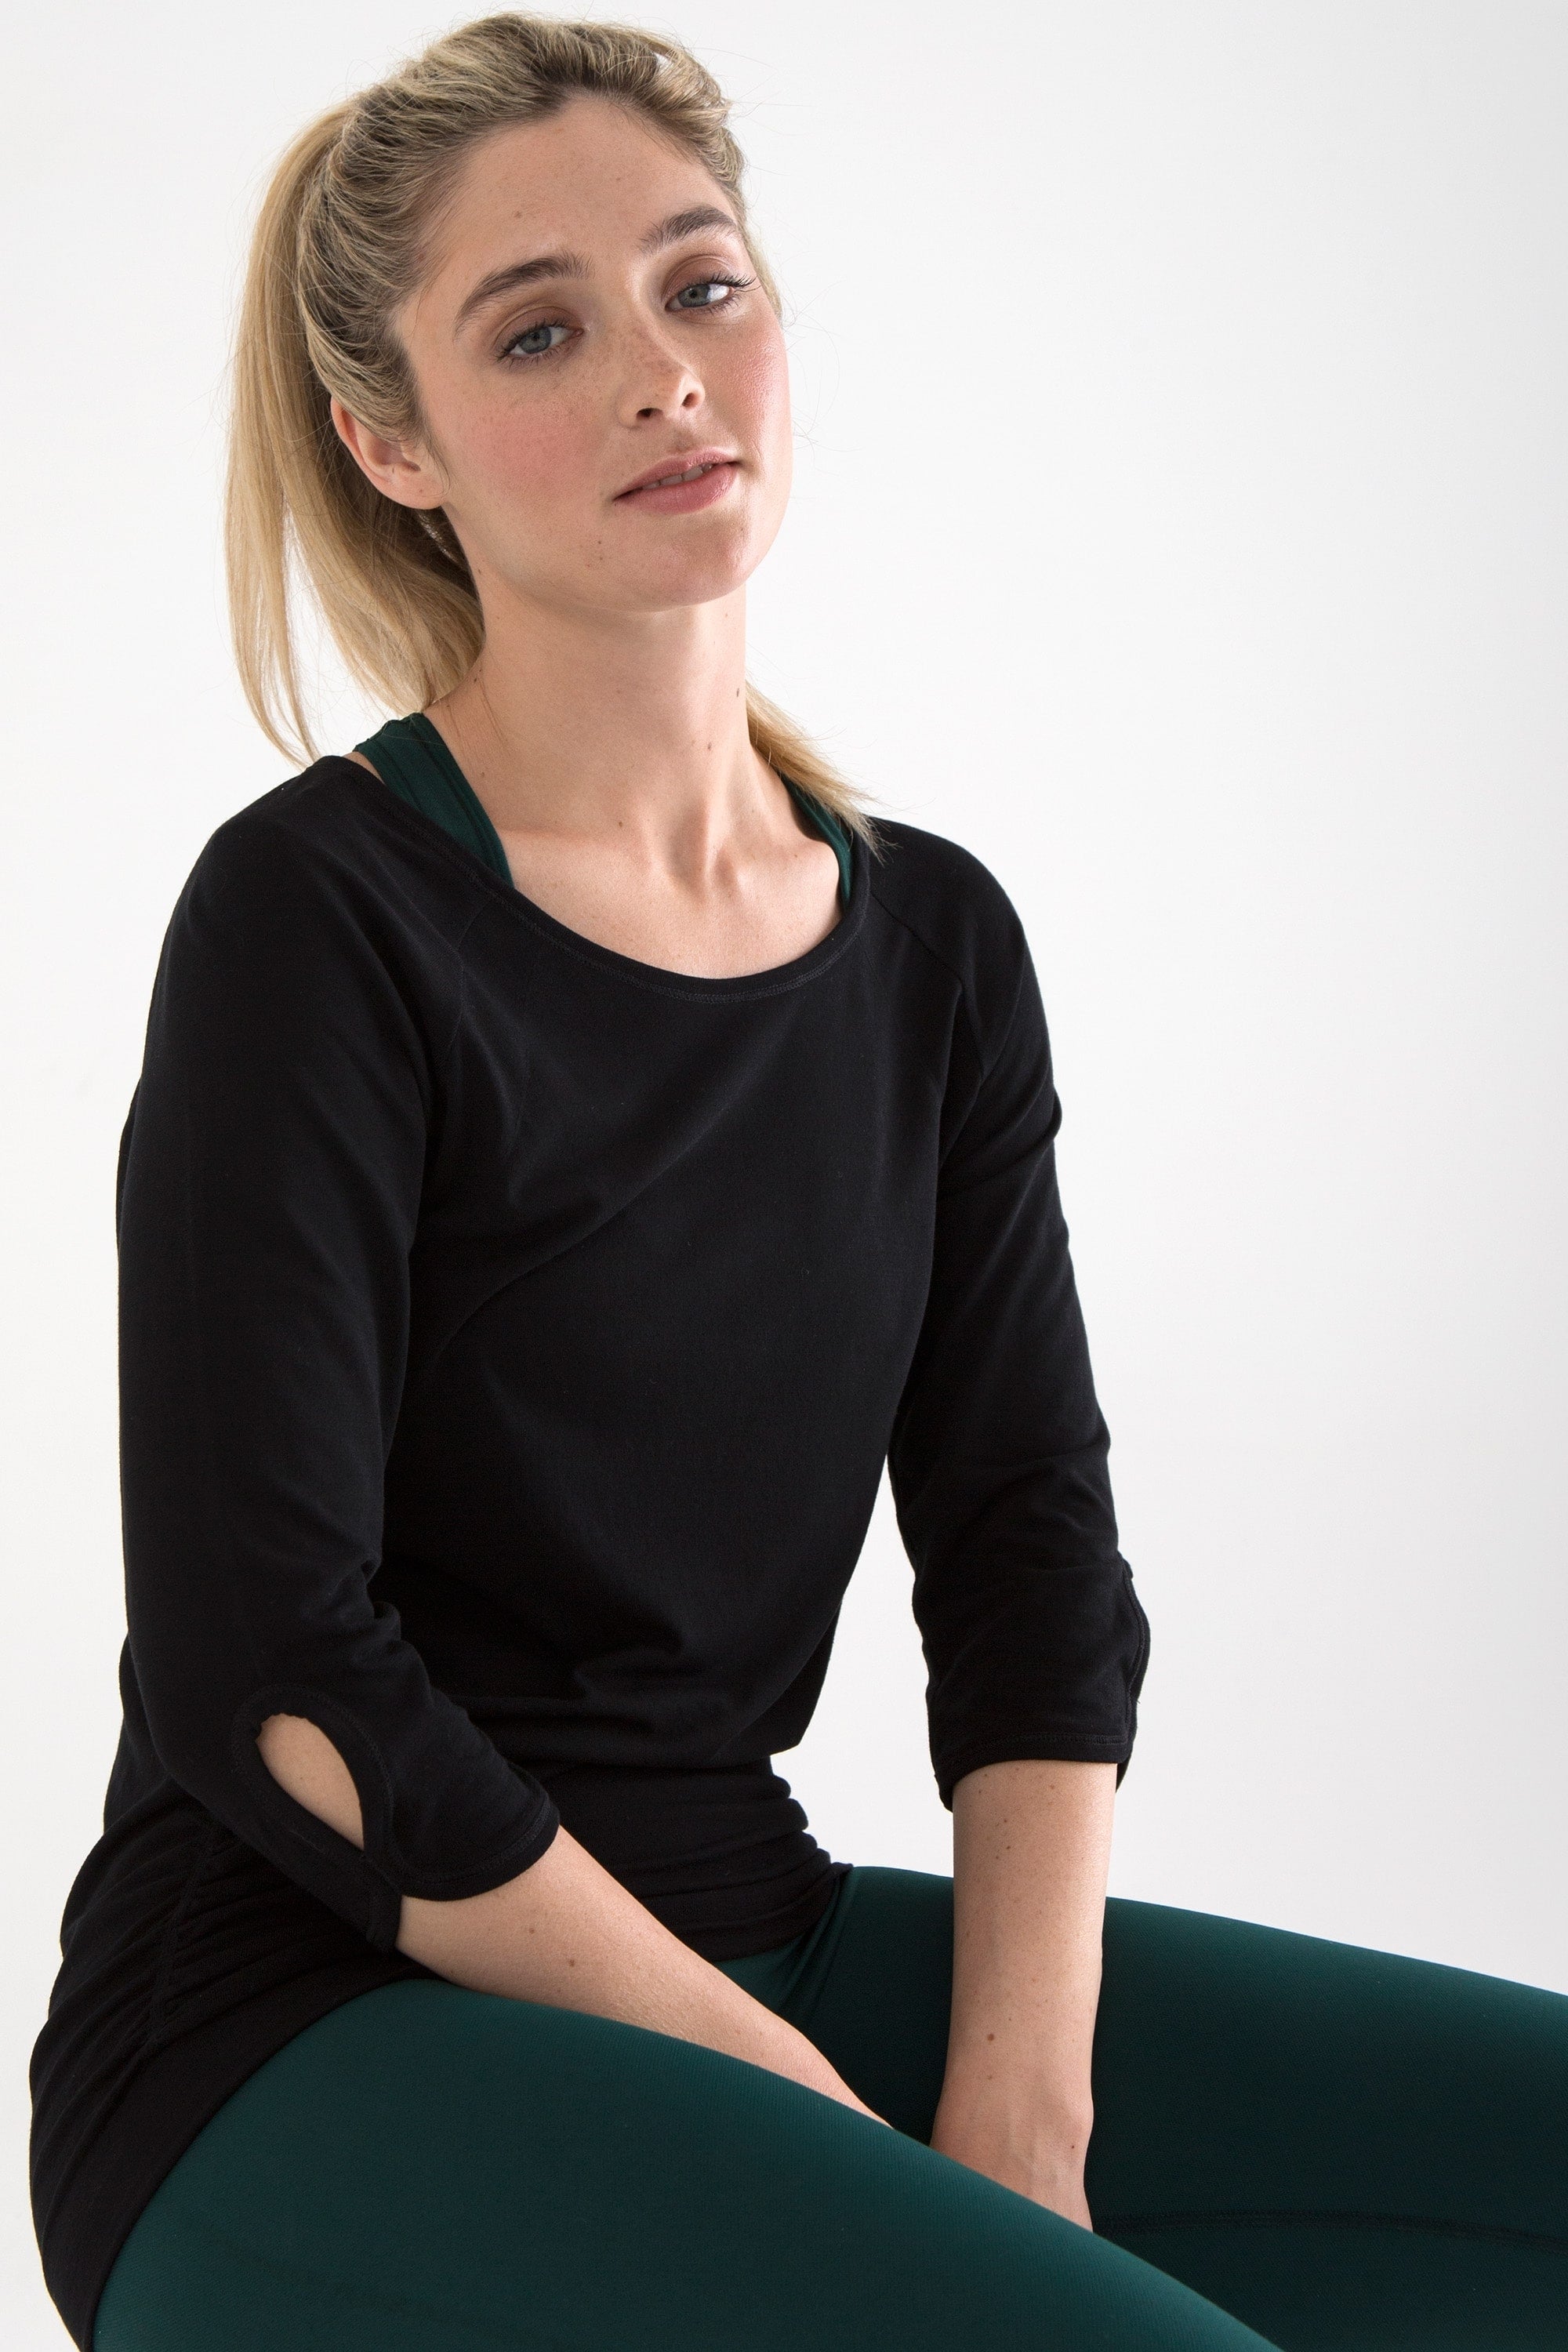 Black bamboo long sleeve top and dark pine green leggings for yoga, pilates, barre and running from sustainable activewear brand, Jilla Active